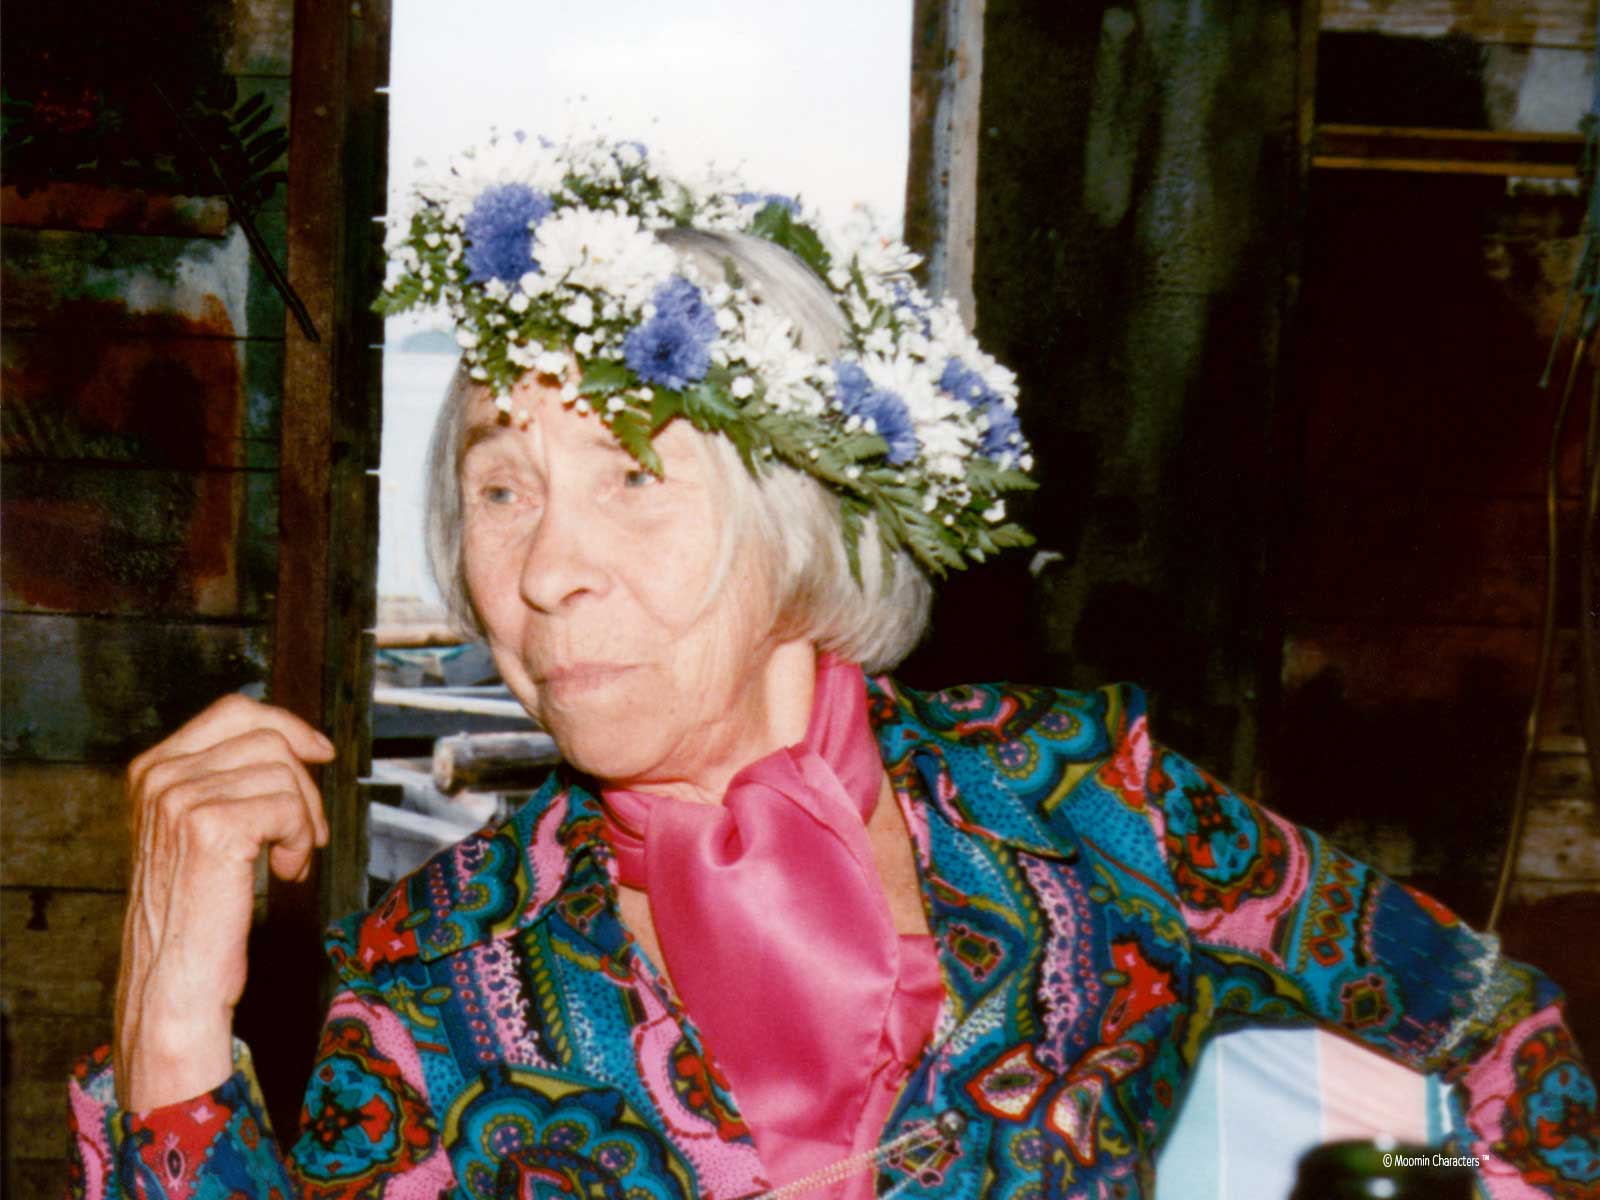 Tove Jansson with her birthday wreath.